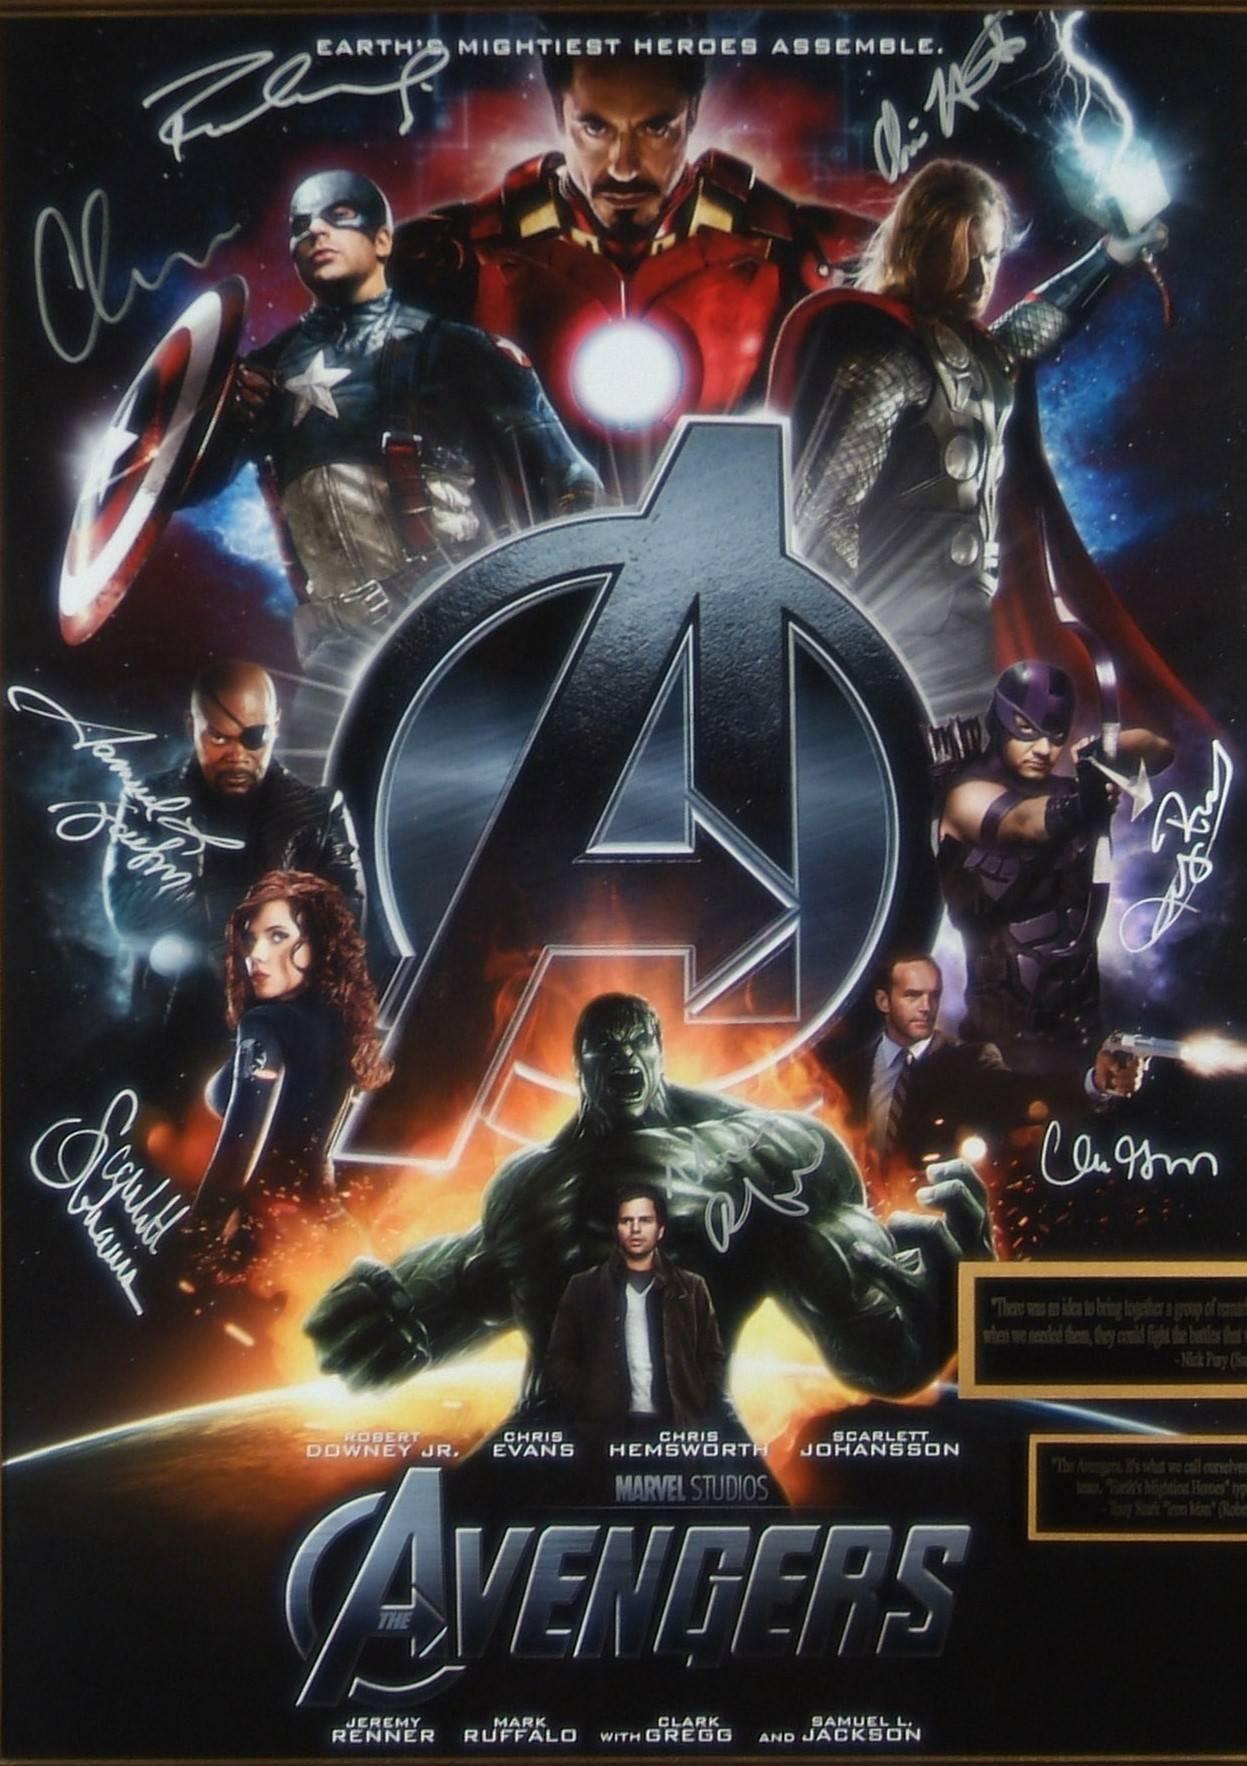 Marvel Avengers complete cast autographed poster framed memorabilia display 

• Featuring a 17.5 x 24” the official Marvel Avengers movie poster authentically hand signed by cast
• Signed by Robert Downey Jr., Chris Evans, Chris Hemsworth,